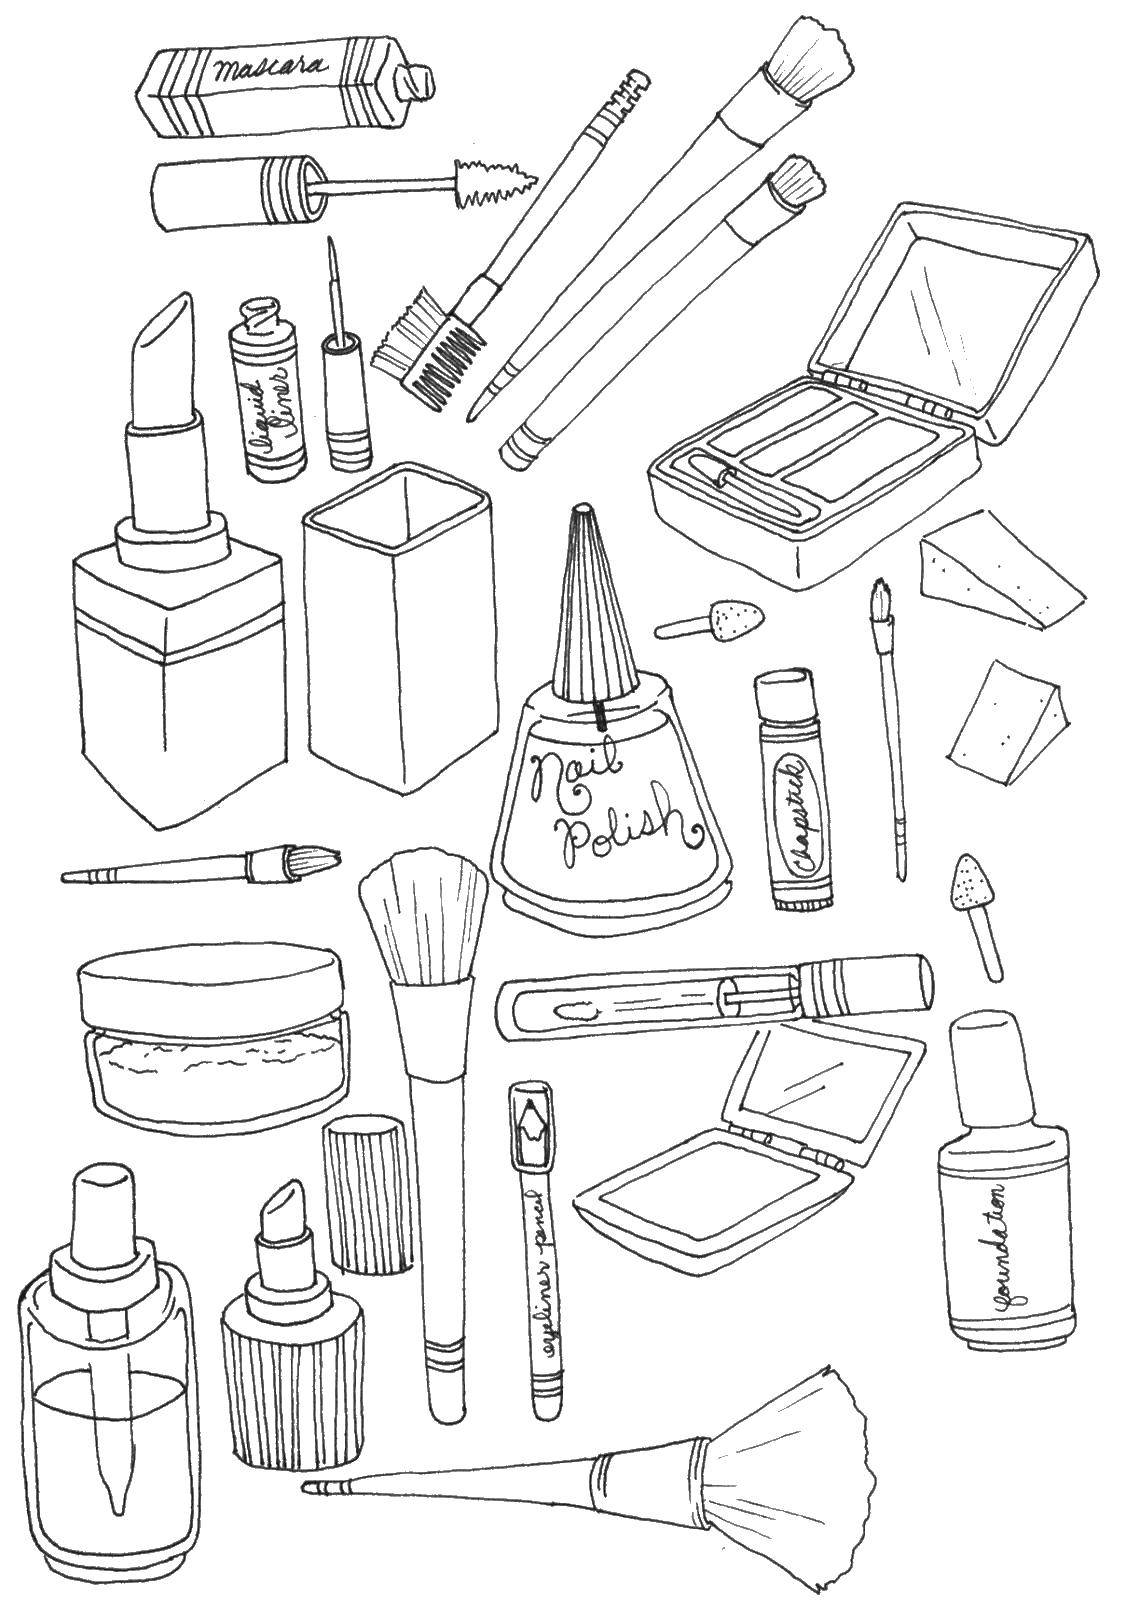 Online coloring pages coloring page all makeup makeup download print coloring page